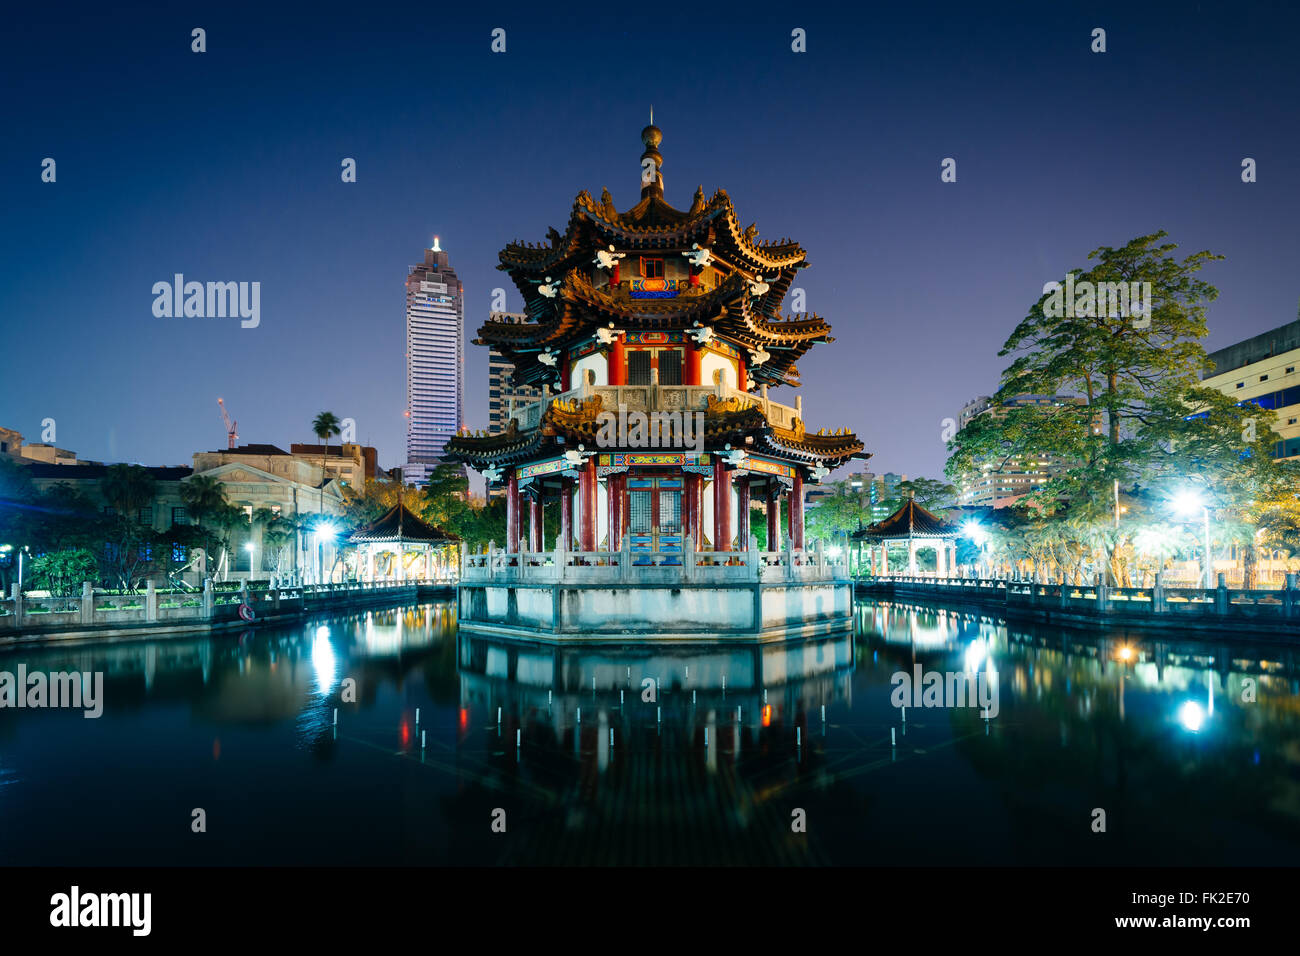 Traditional Chinese building and pond at night, at 2/28 Peace Park, in Taipei, Taiwan. Stock Photo